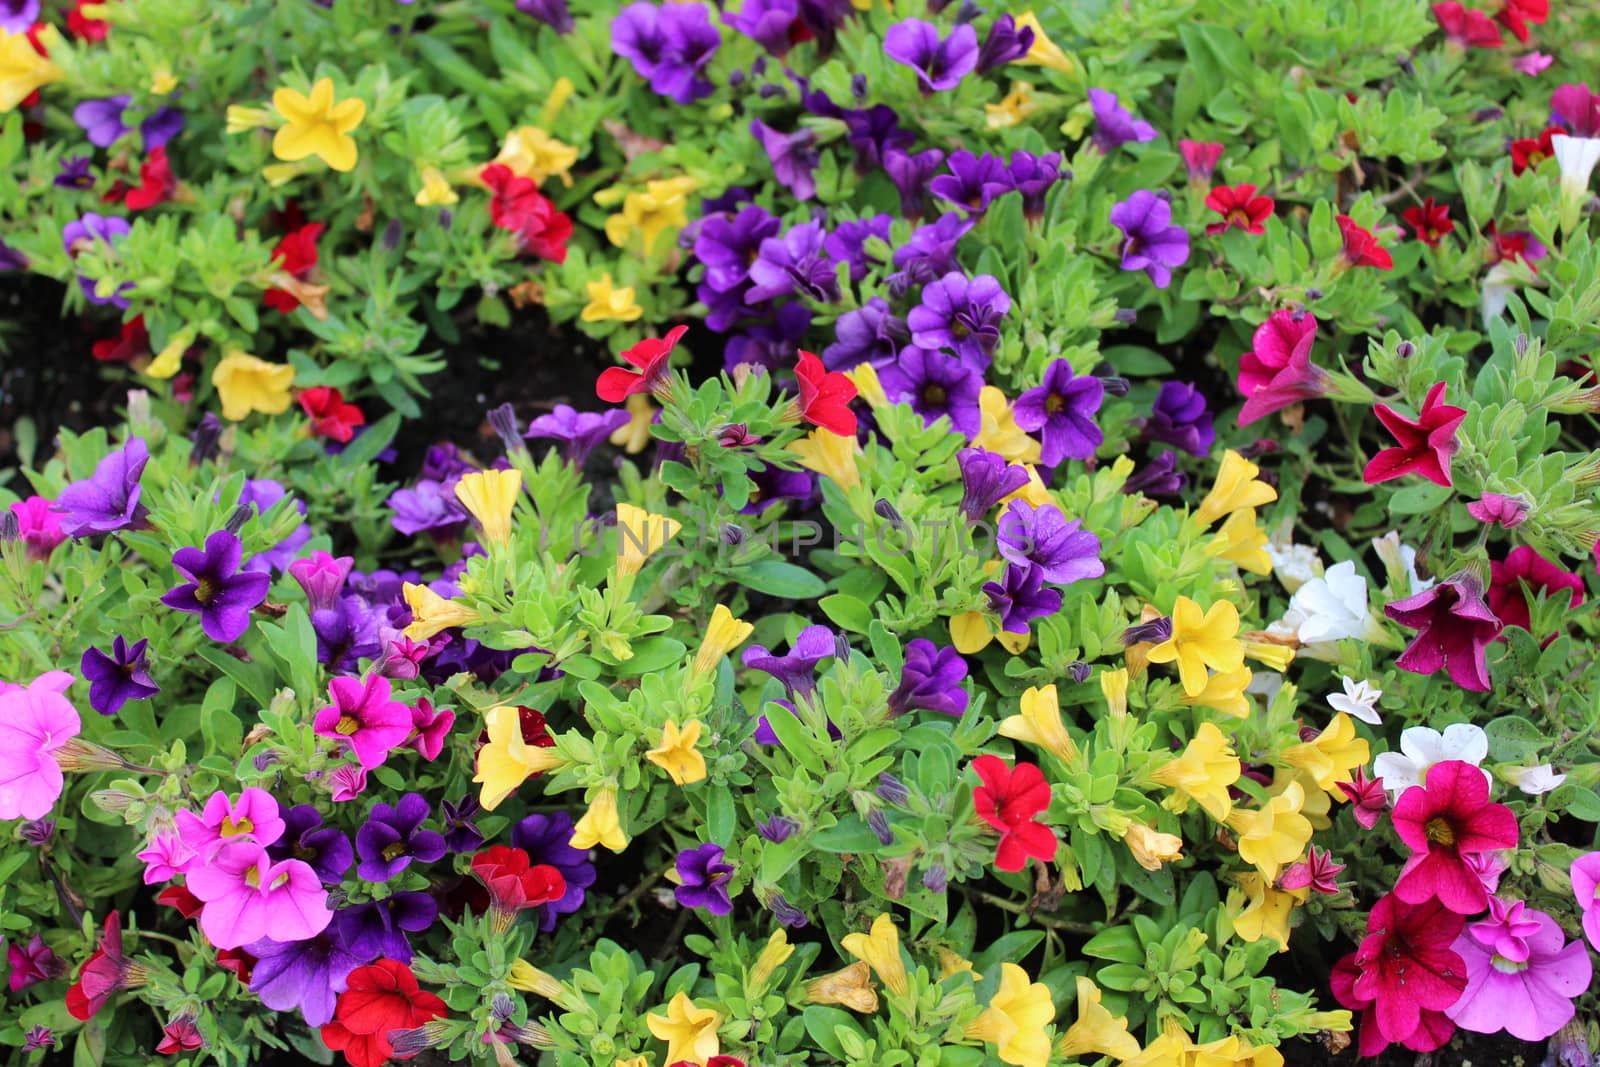 The picture shows colorful calibrachoa plants in the garden